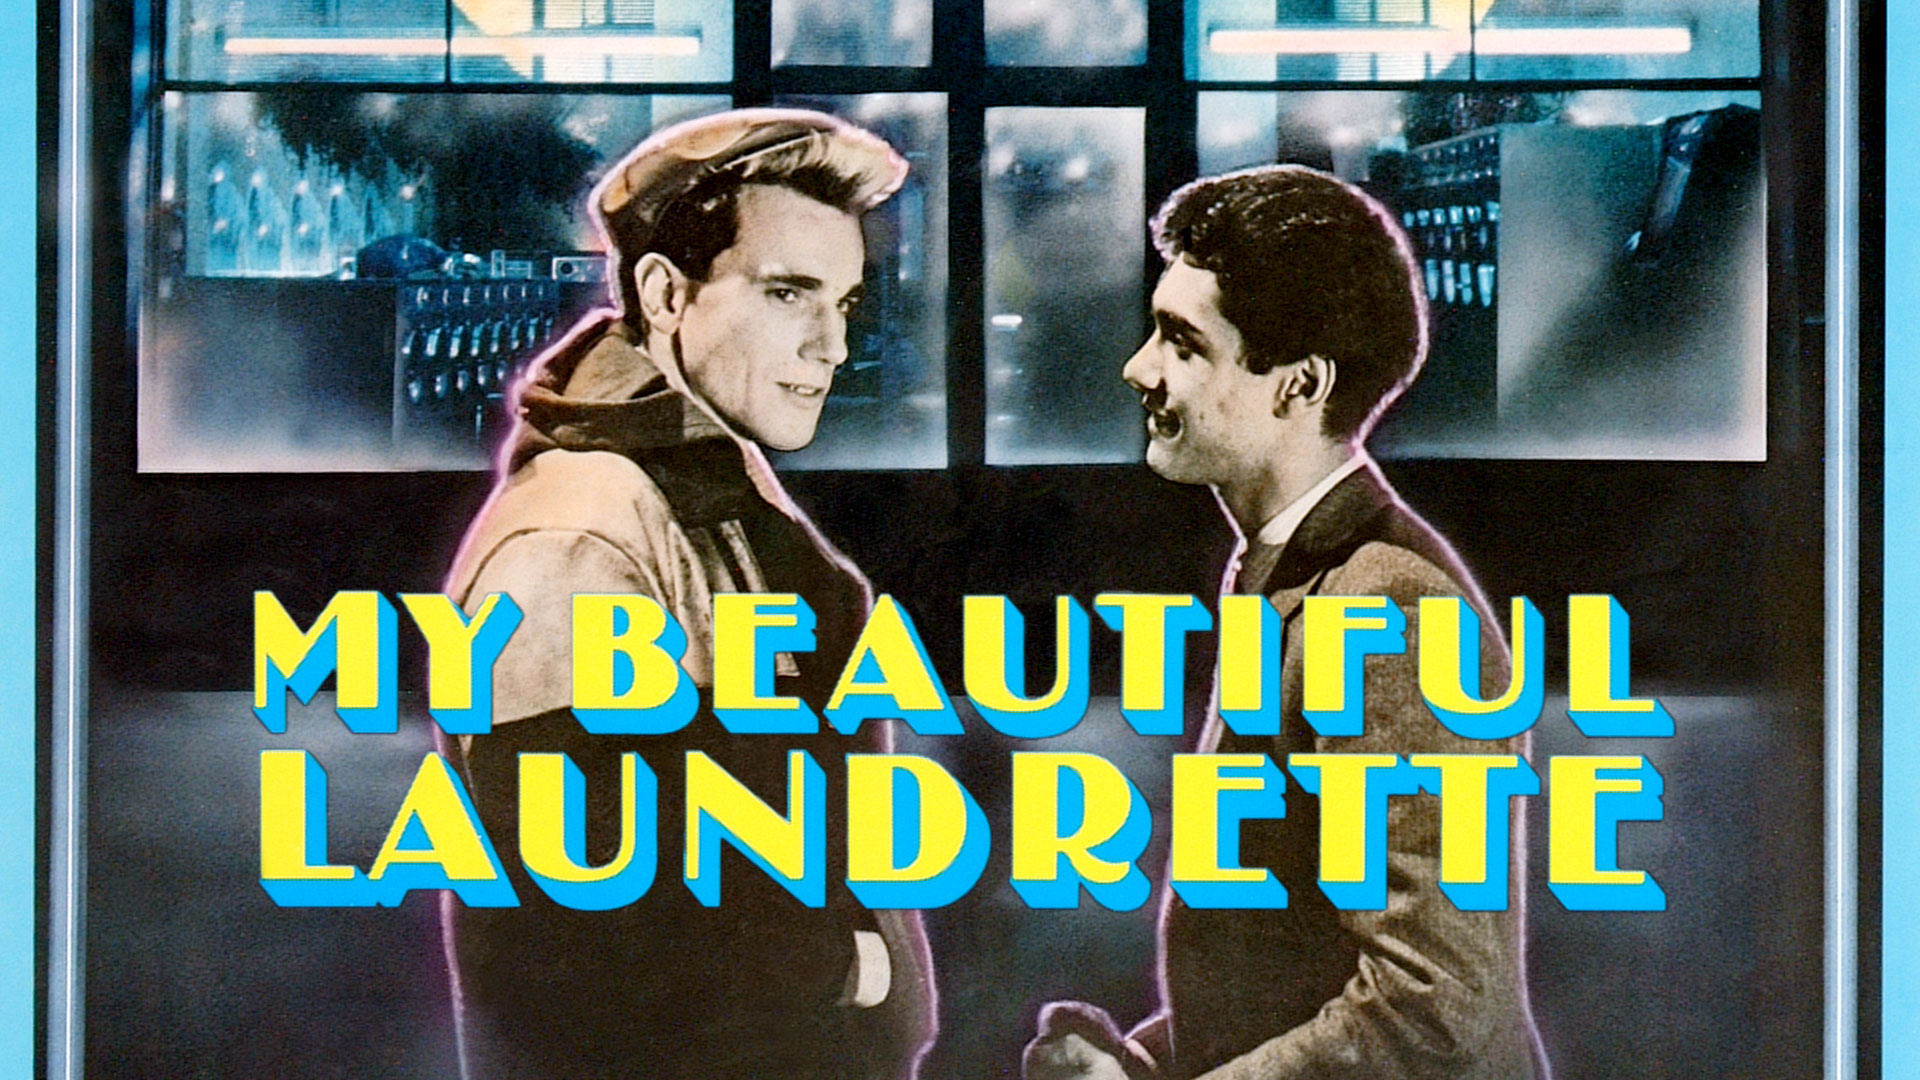 My Beautiful Laundrette - Hollywood Suite